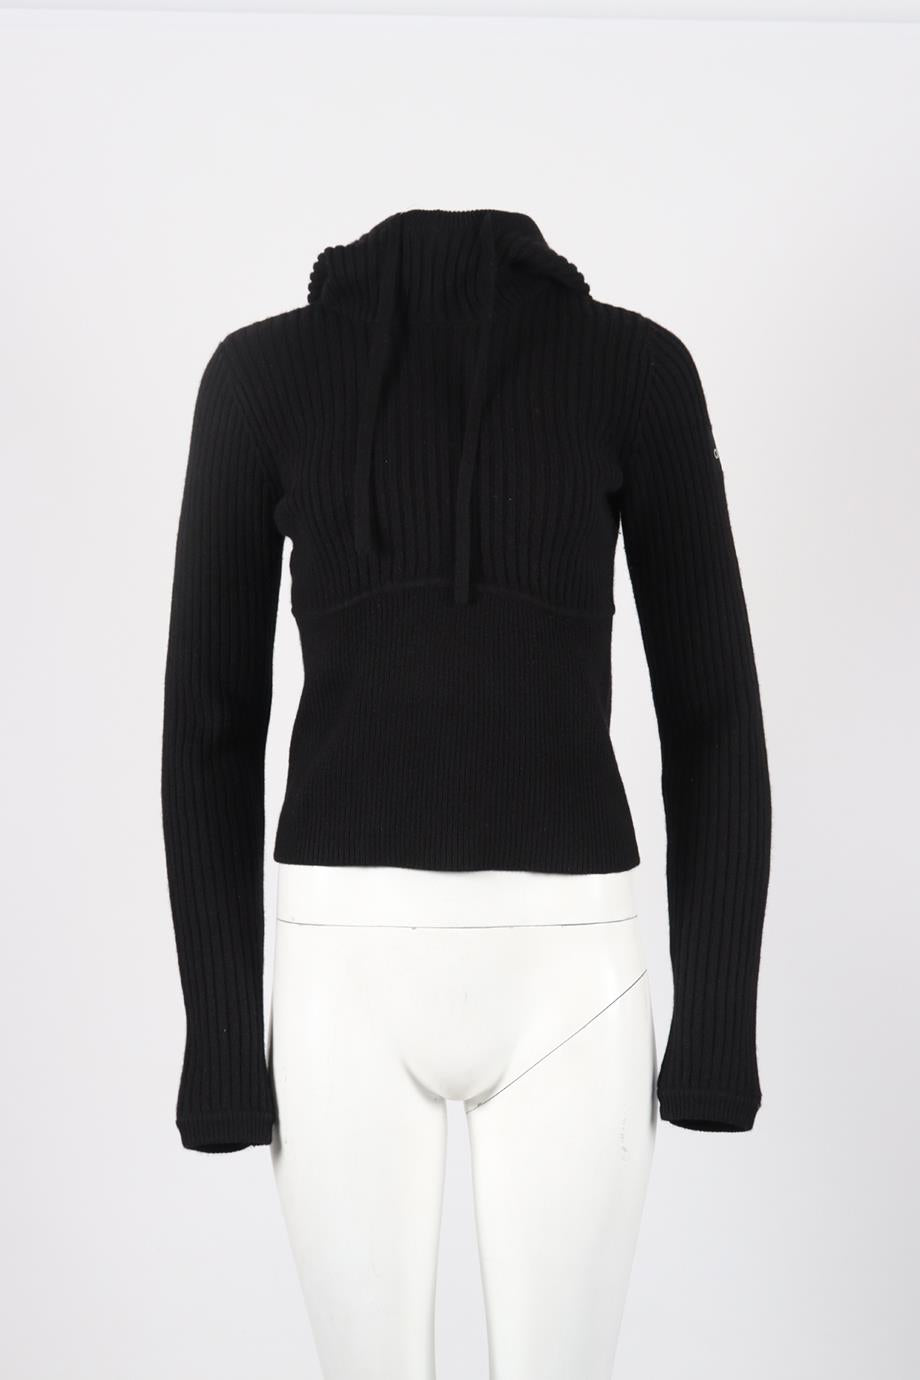 ALO YOGA RIBBED KNIT HOODIE SMALL